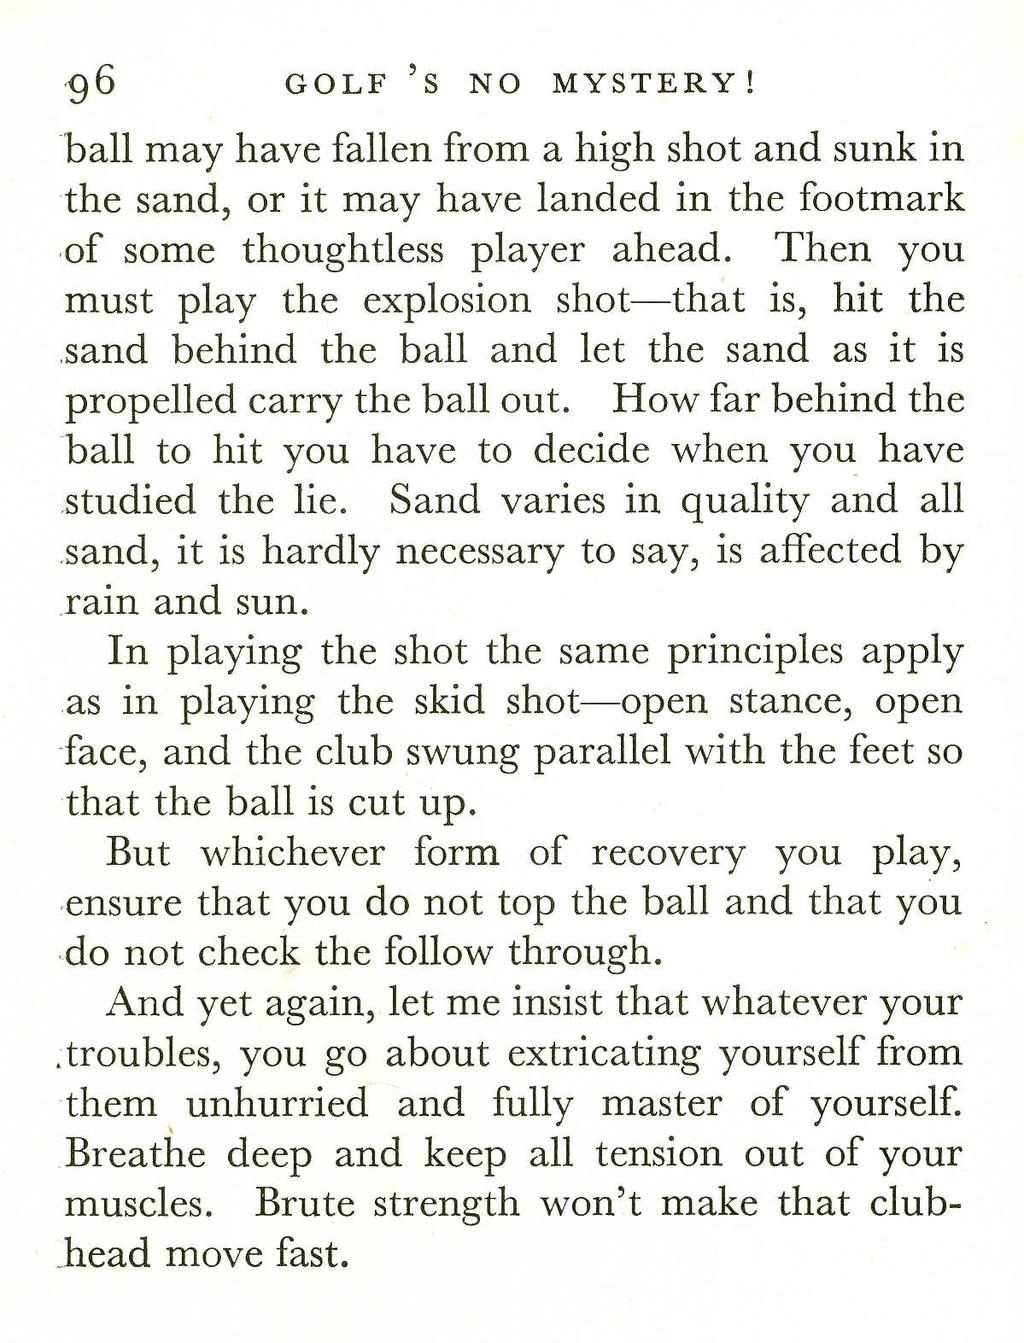 96 GOLF'S NO MYSTERY! ball may have fallen from a high shot and sunk in the sand, or it may have landed in the footmark of some thoughtless player ahead.